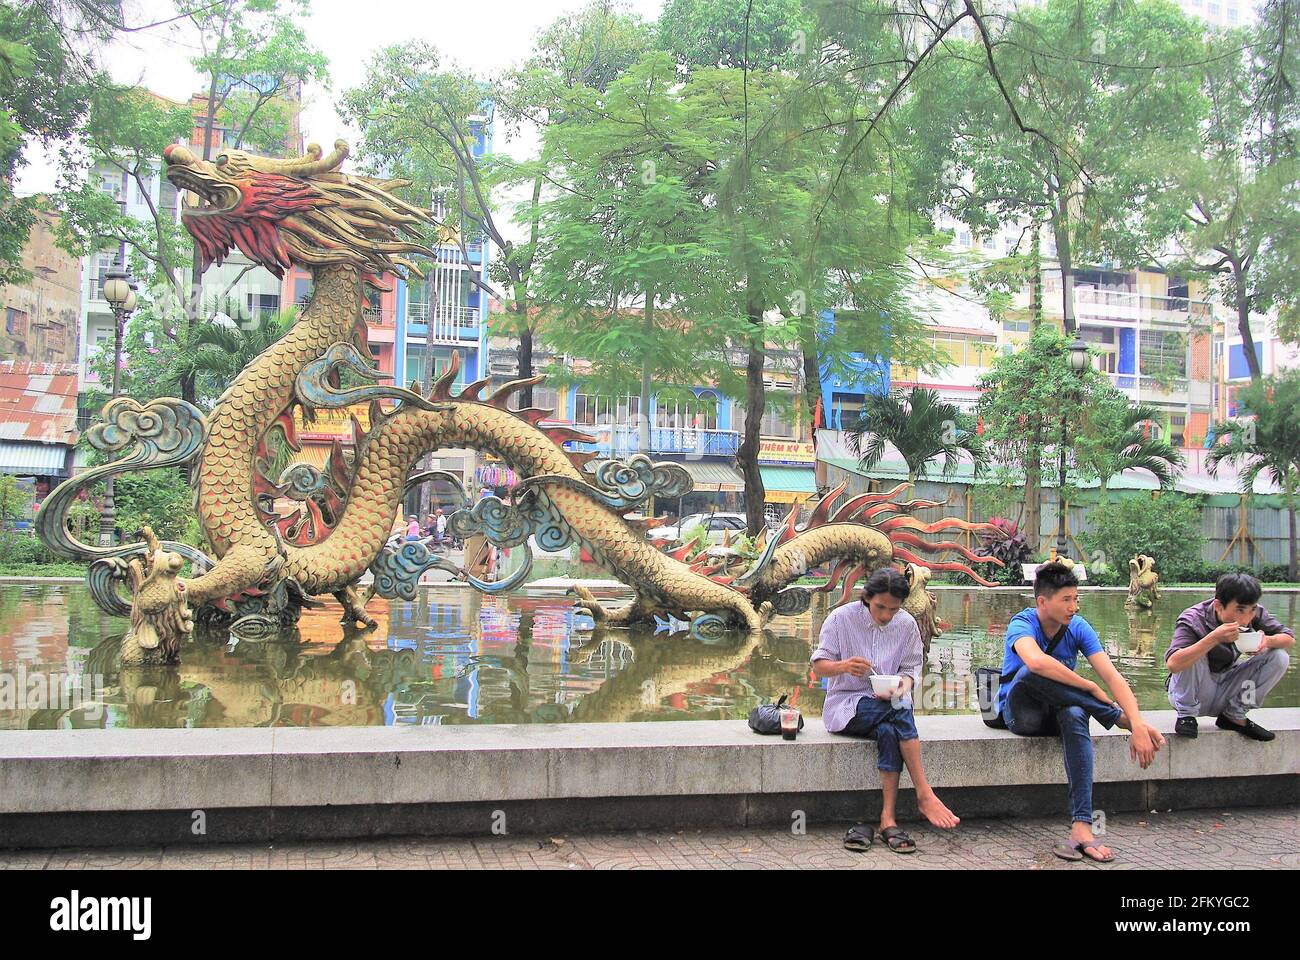 Street scene of 3 friends on lunchbreak at ornamental gardens with pond and dragon sculpture, Chinatown, Ho Chi Minh City, Vietnam, Asia Stock Photo